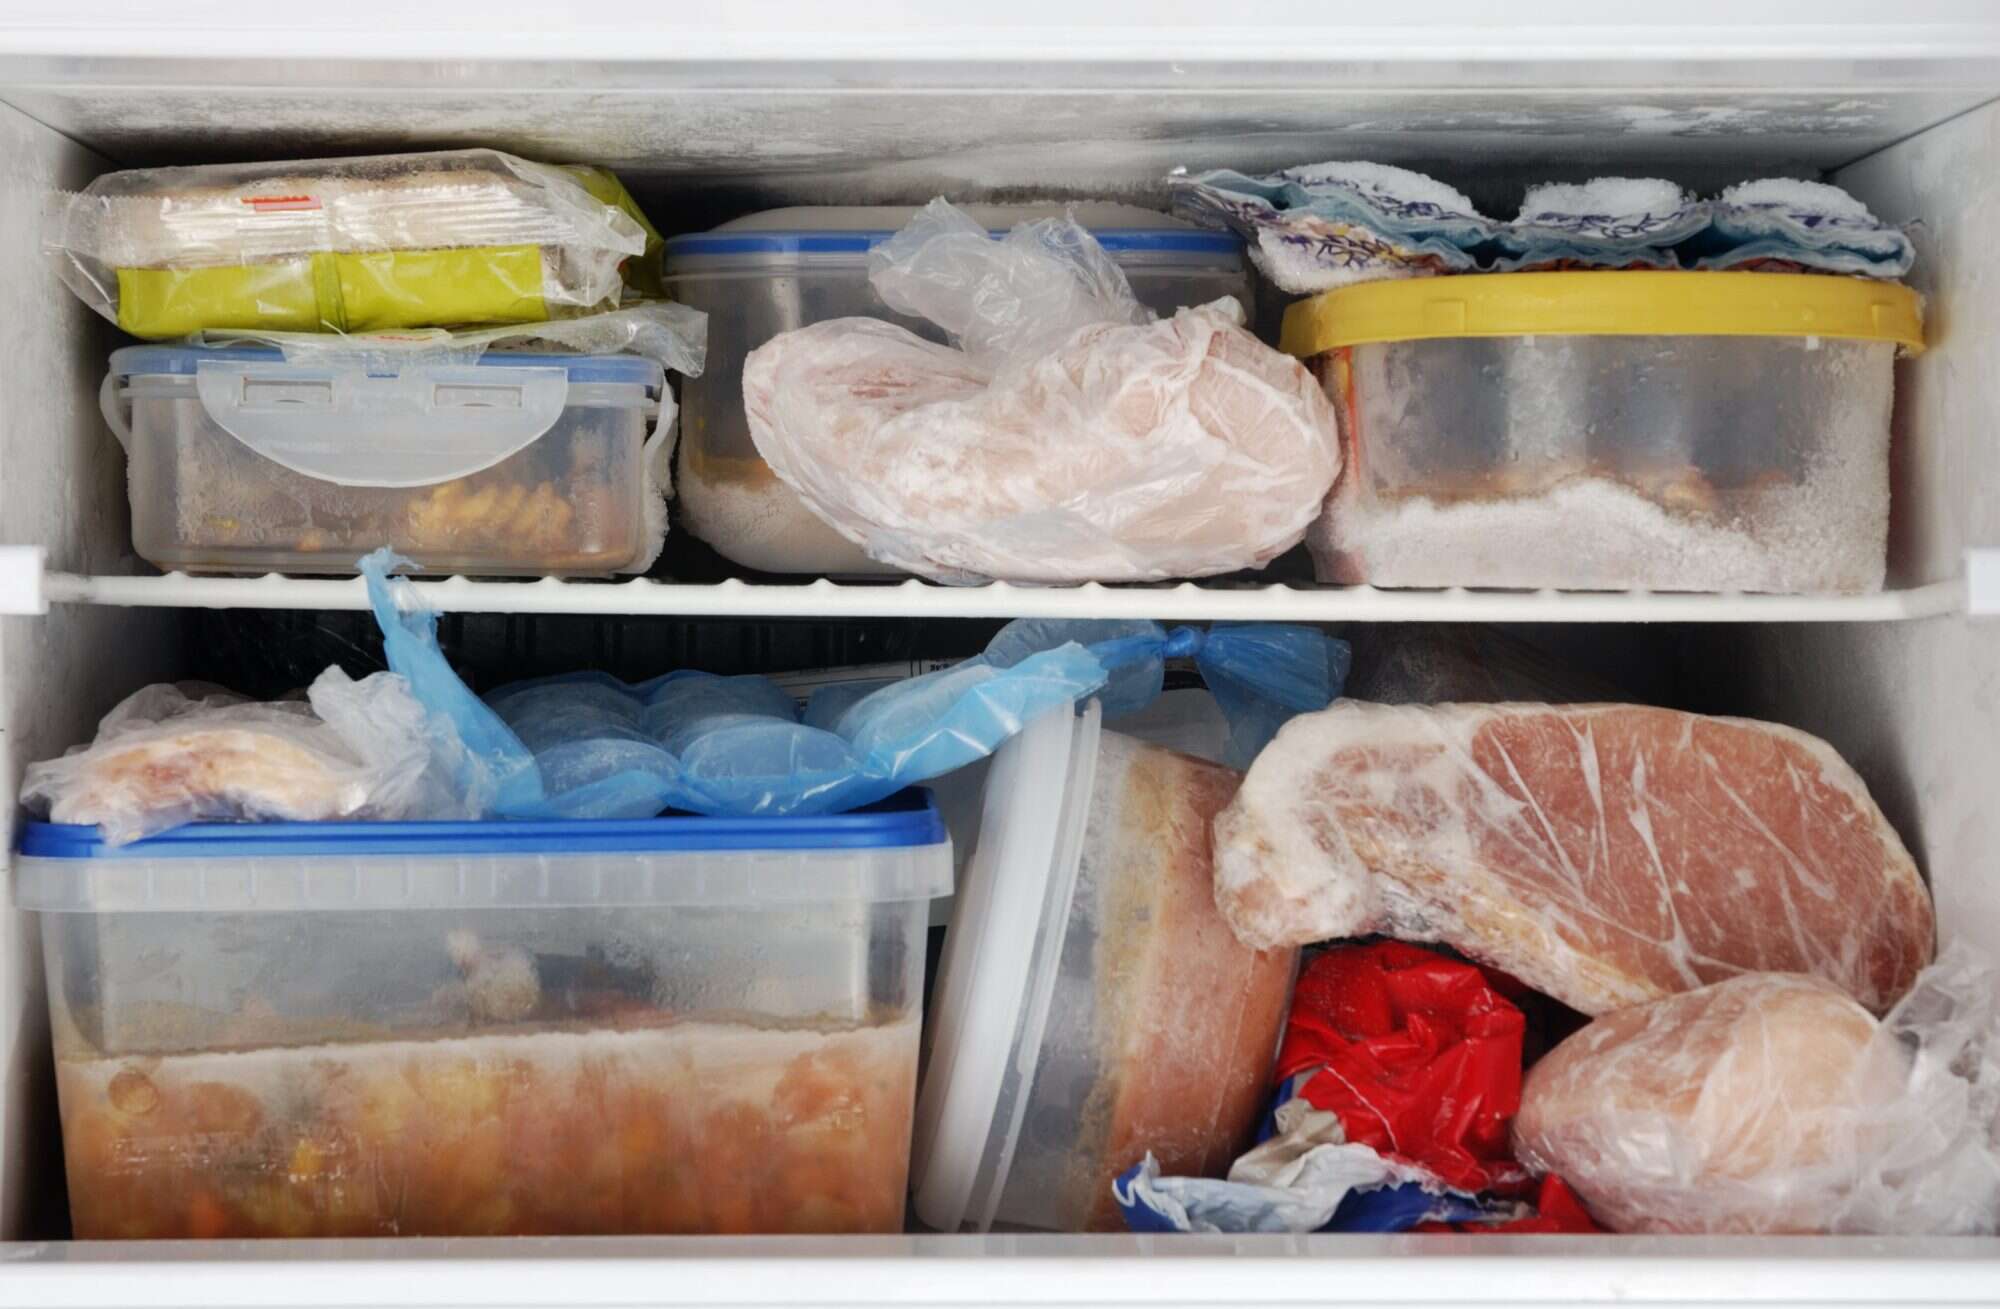 The Best Food Freezer Containers for Freezer Meals